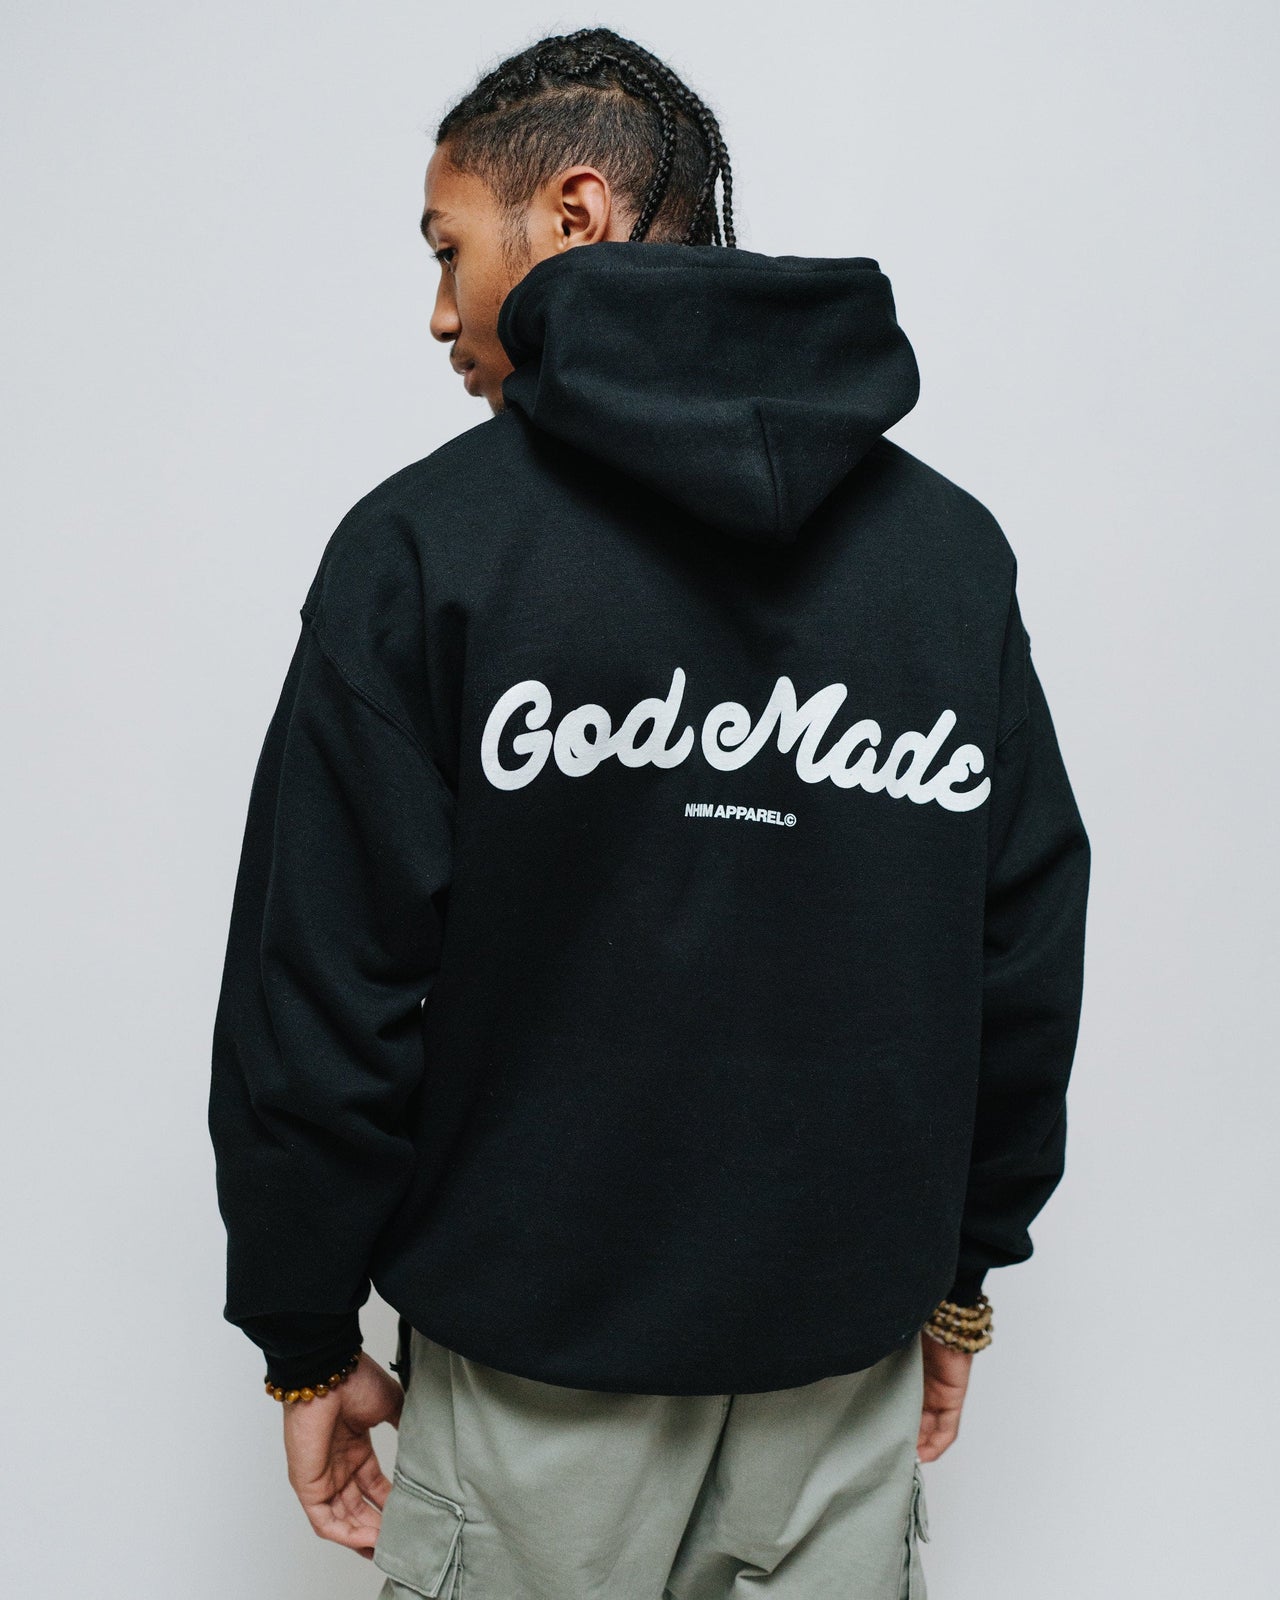 God Made Christian Hoodie in black by NHIM Apparel Christian clothing brand.